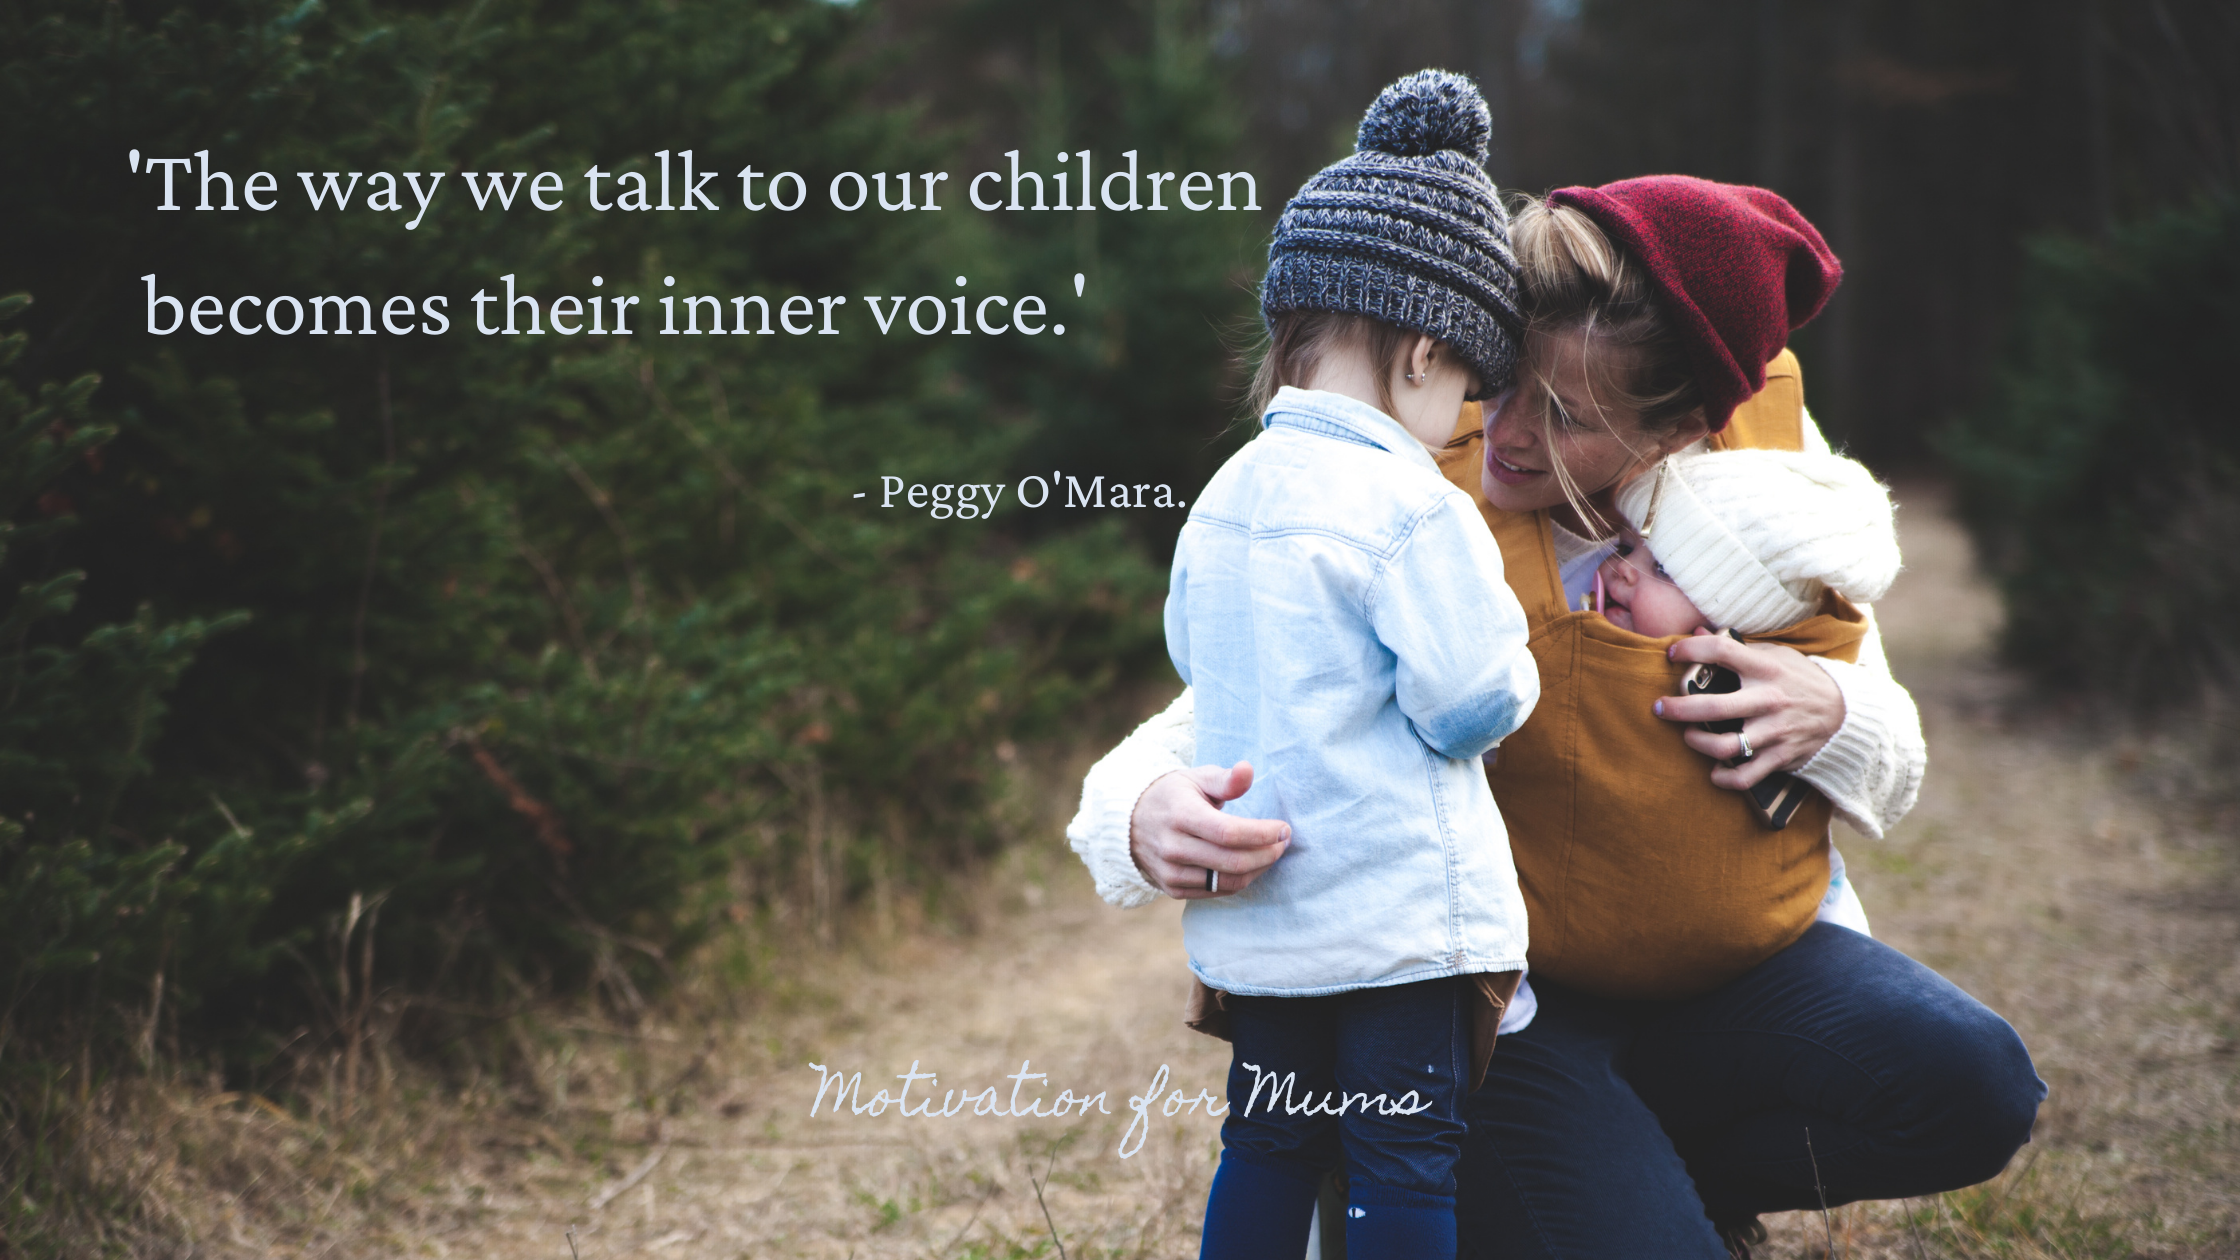 The way we talk to our children becomes their inner voice. (1)